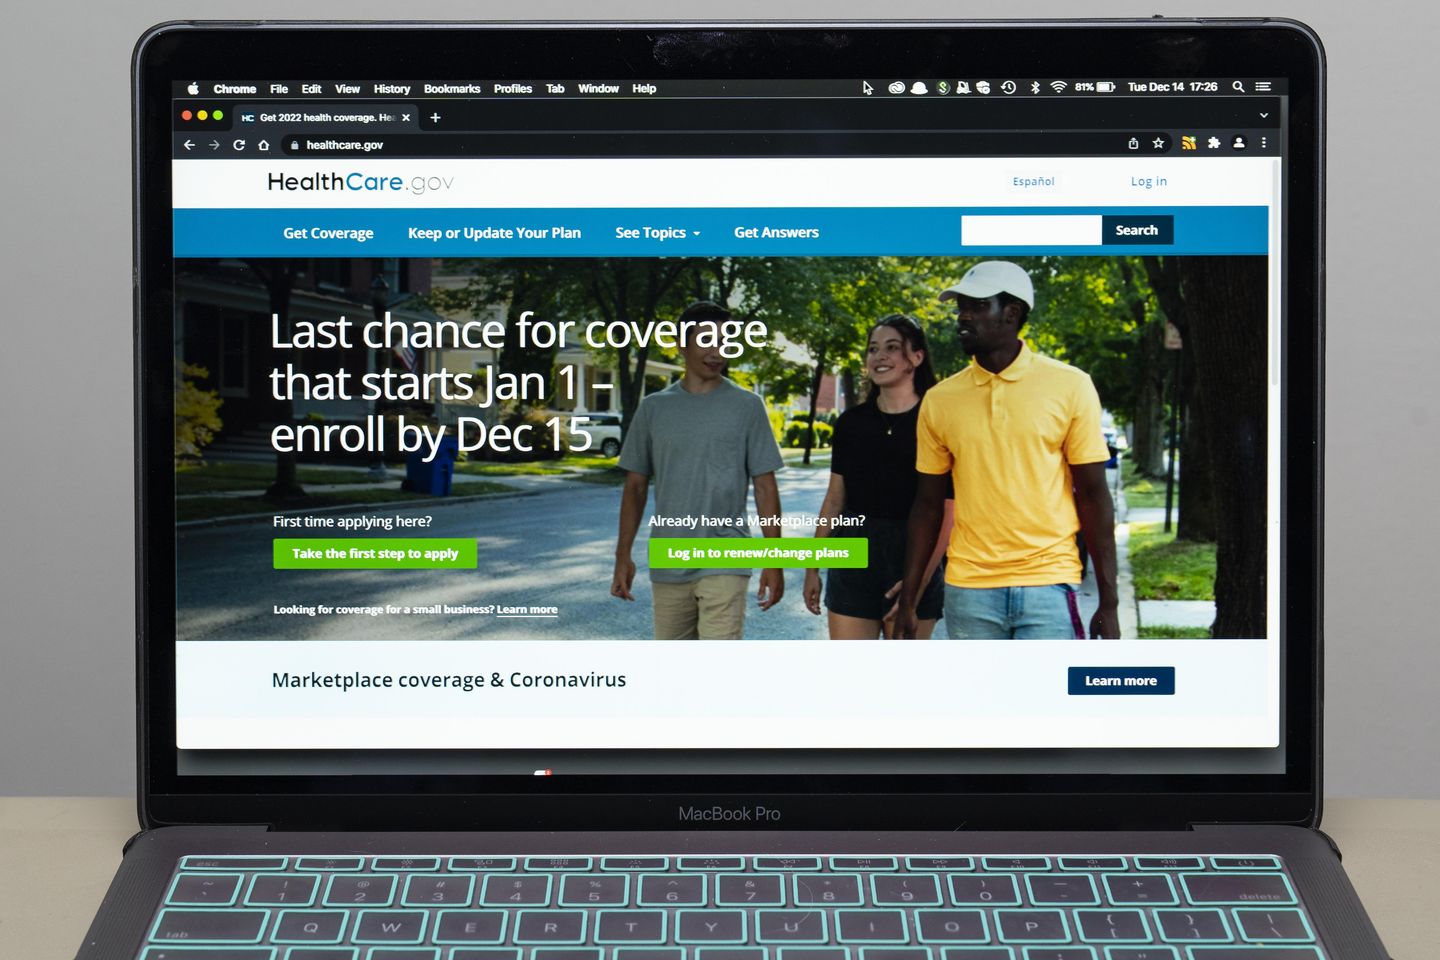 5th U.S. Circuit Court of Appeals halts order that could end Obamacare preventative-care mandate